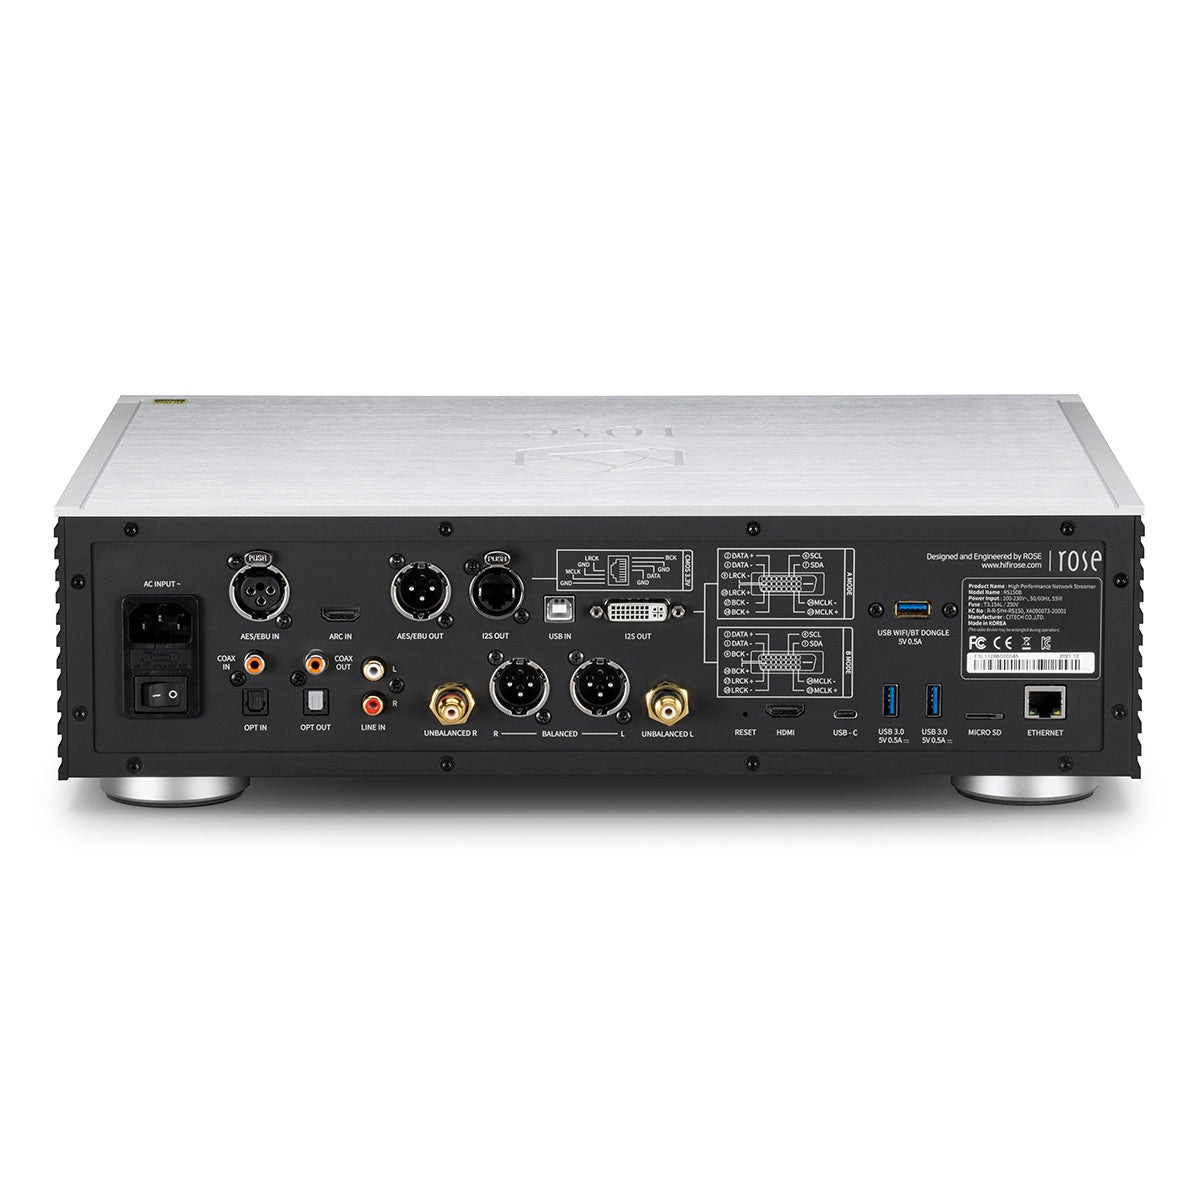 HiFi Rose RS150B High-Performance Network Streamer with Built-In ESS Sabre DAC (Silver) with RSA780 Reference CD Drive and Ripper